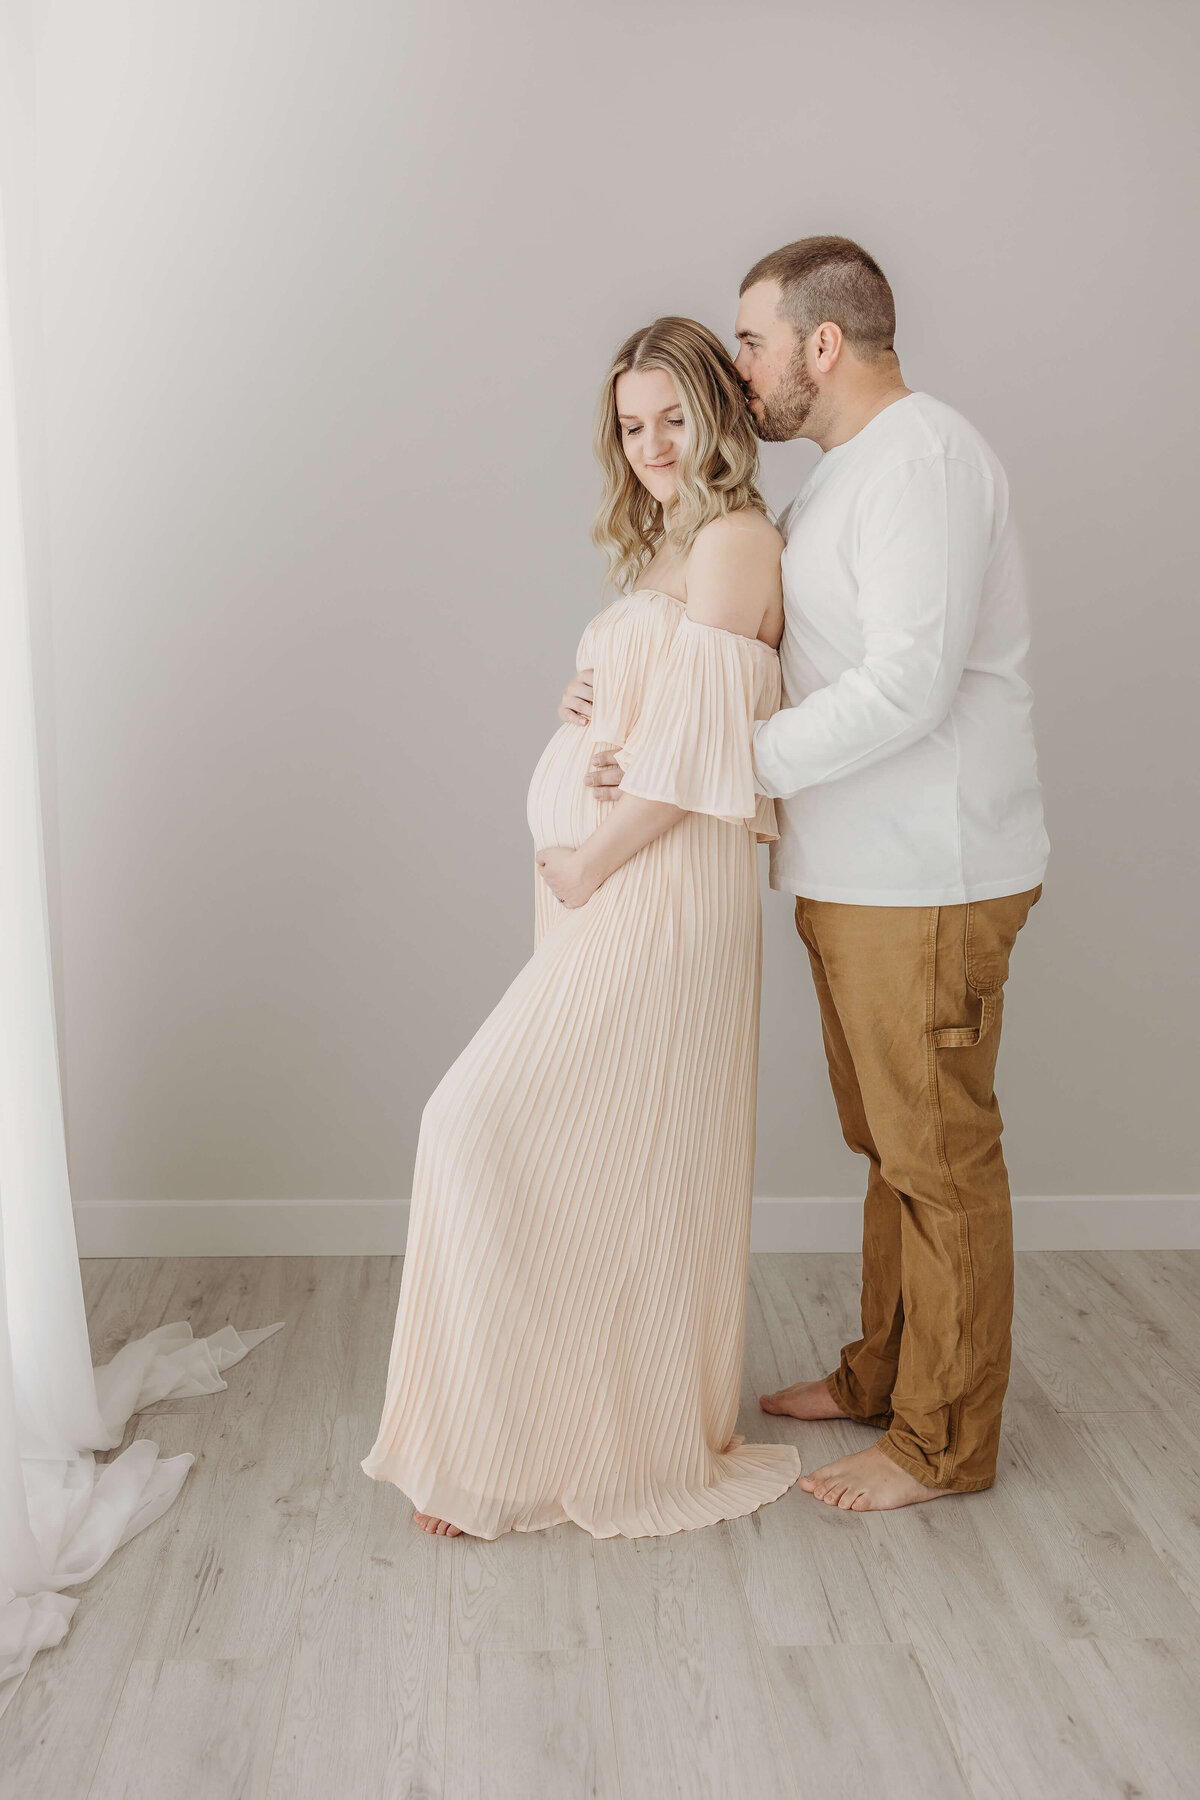 Couple photoshoot for expecting mom and dad in studio